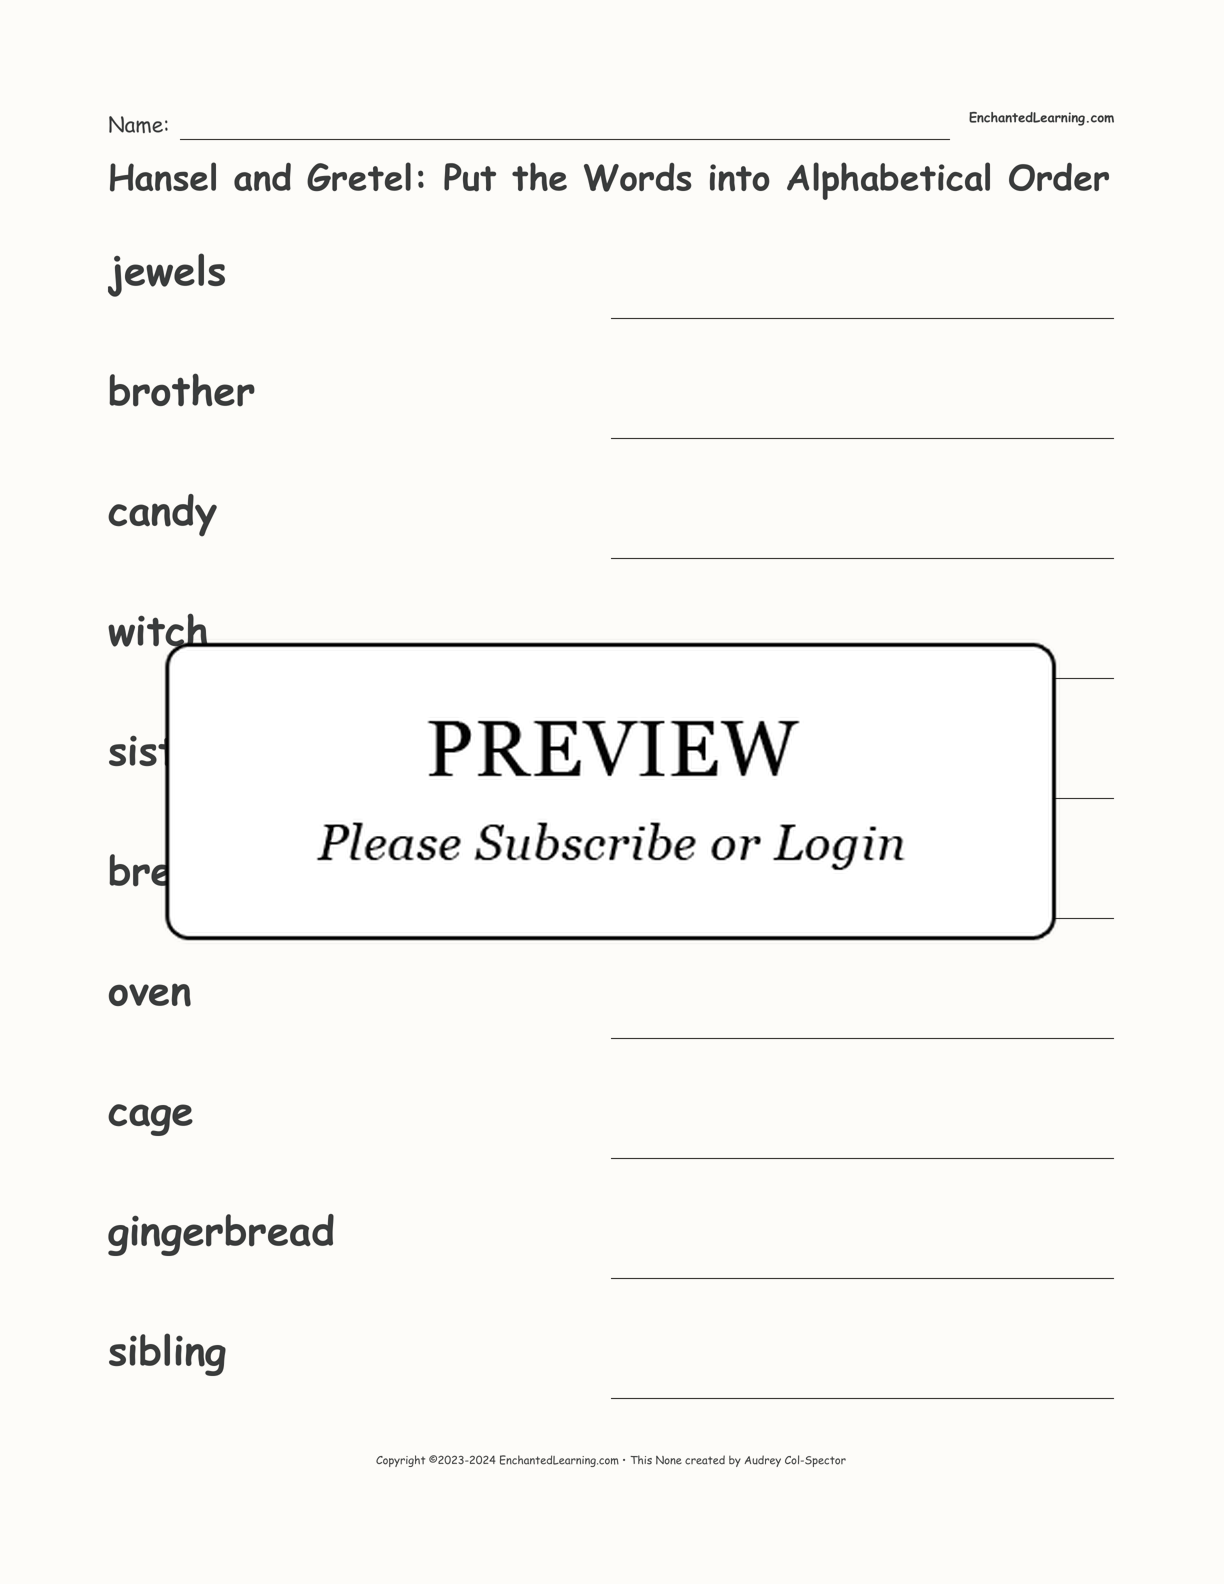 Hansel and Gretel: Put the Words into Alphabetical Order interactive worksheet page 1